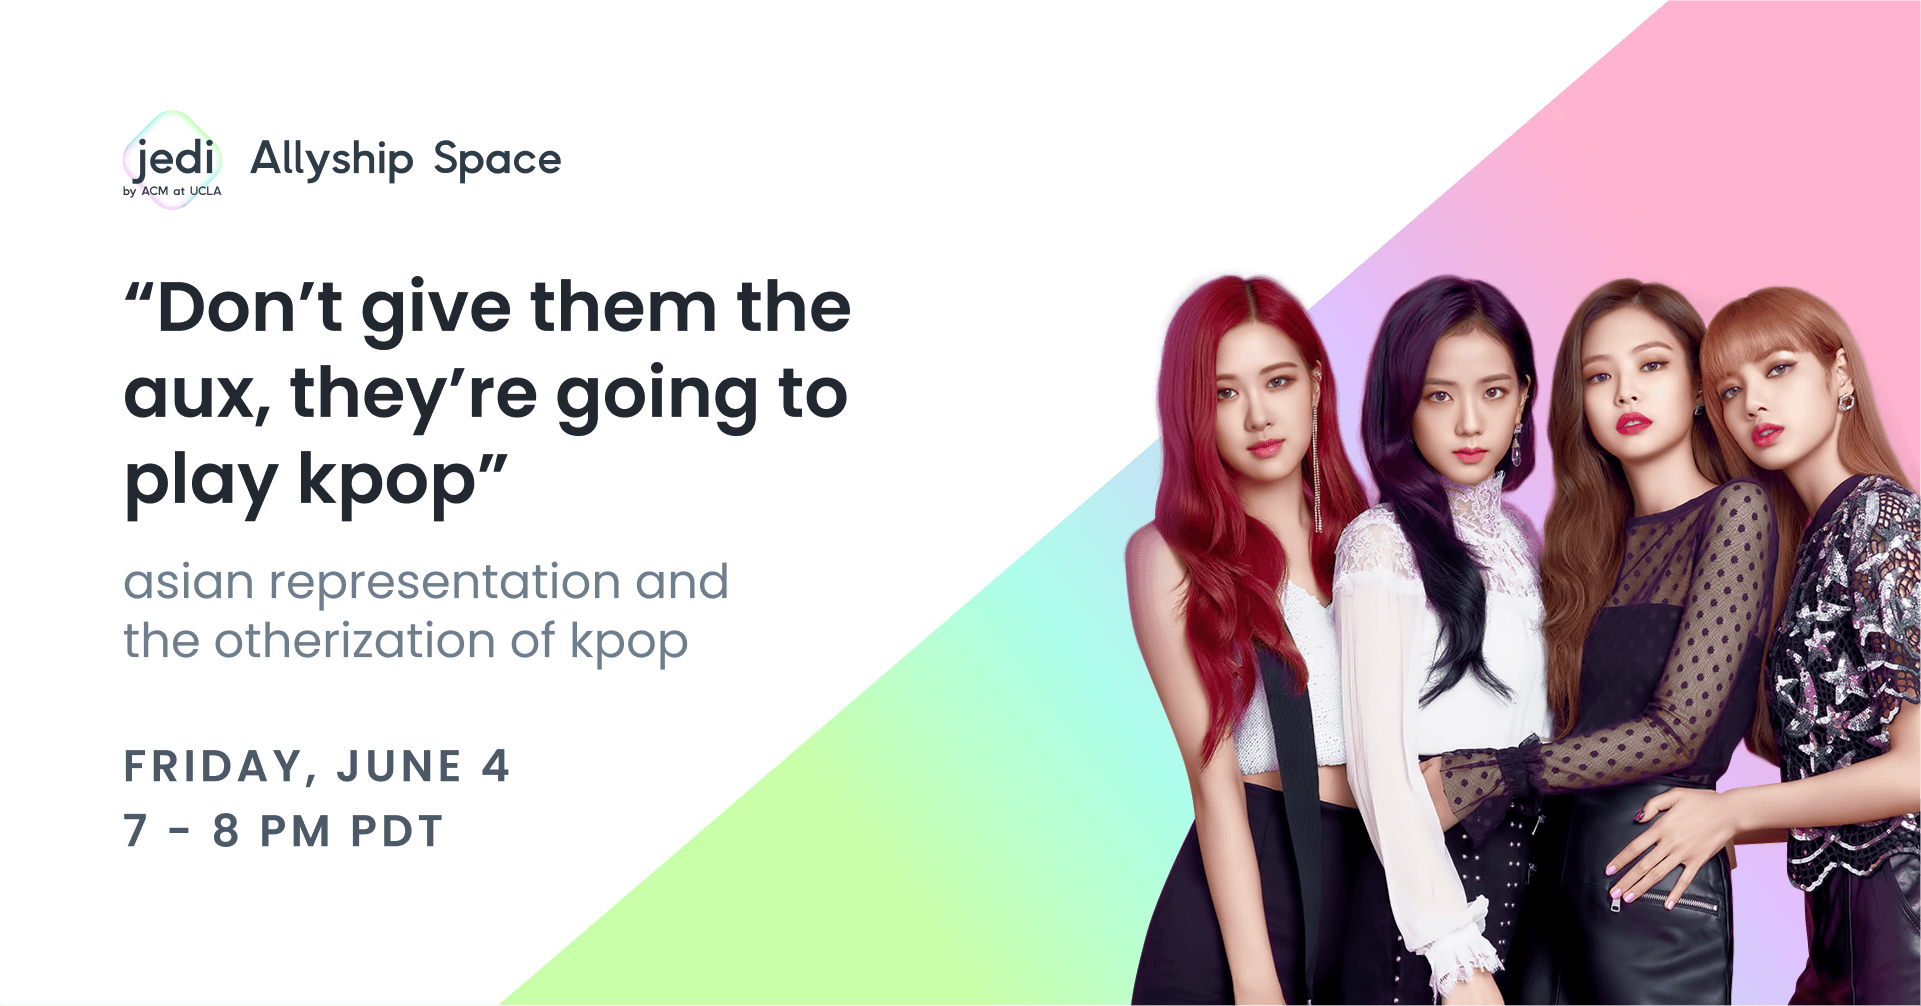 a slide titled "don't give them the aux, they're going to play kpop: asian representation and the otherization of kpop. features four prominent female Kpop idols.